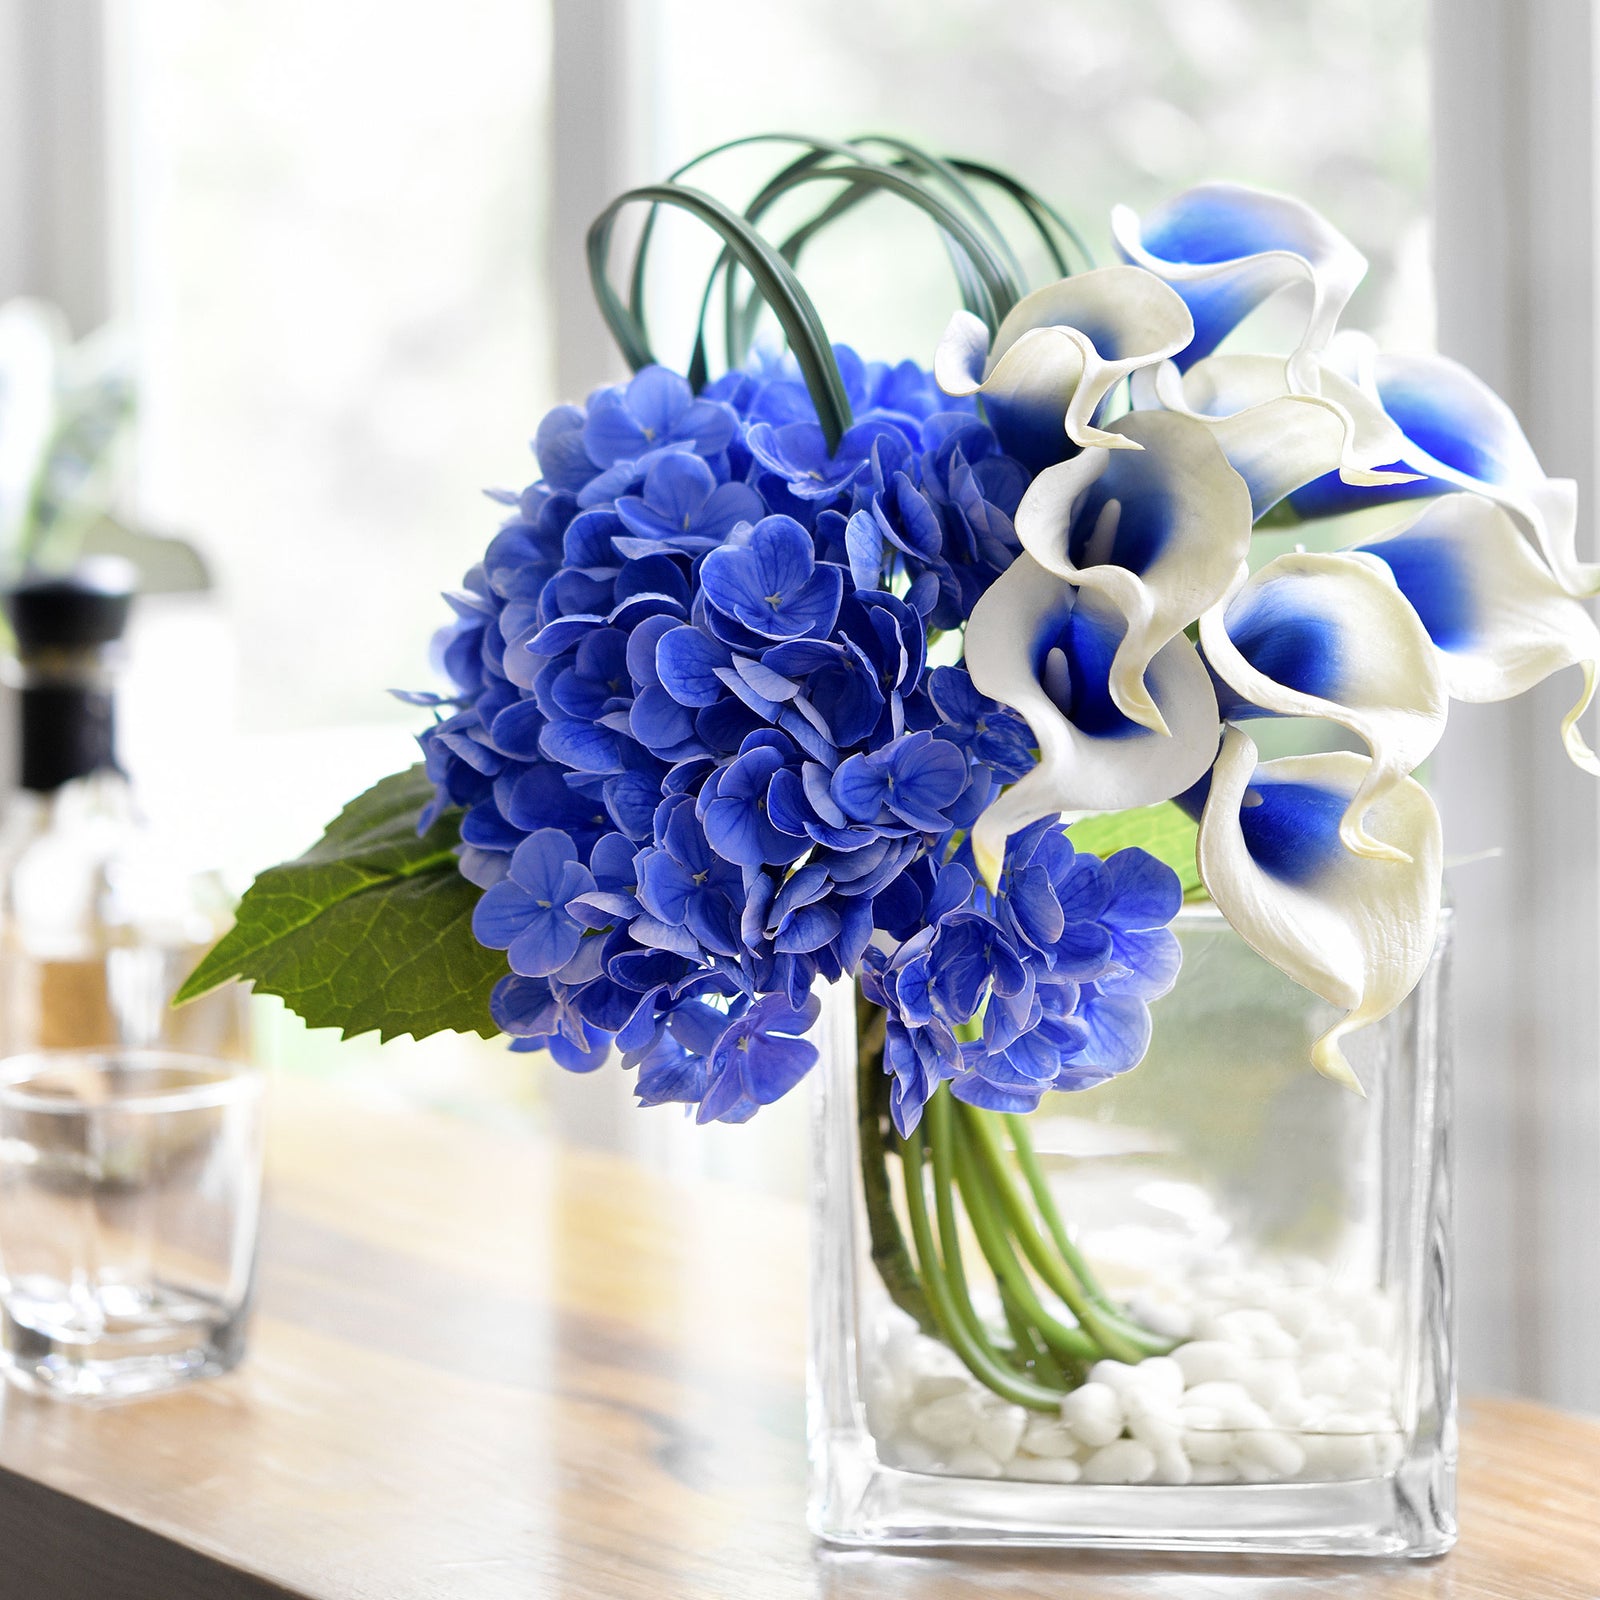 Real Touch Royal Blue Hydrangea and Blue with White Call Lilies Mix Flower Bouquet Artificial Flowers Arrangement 14 Stems